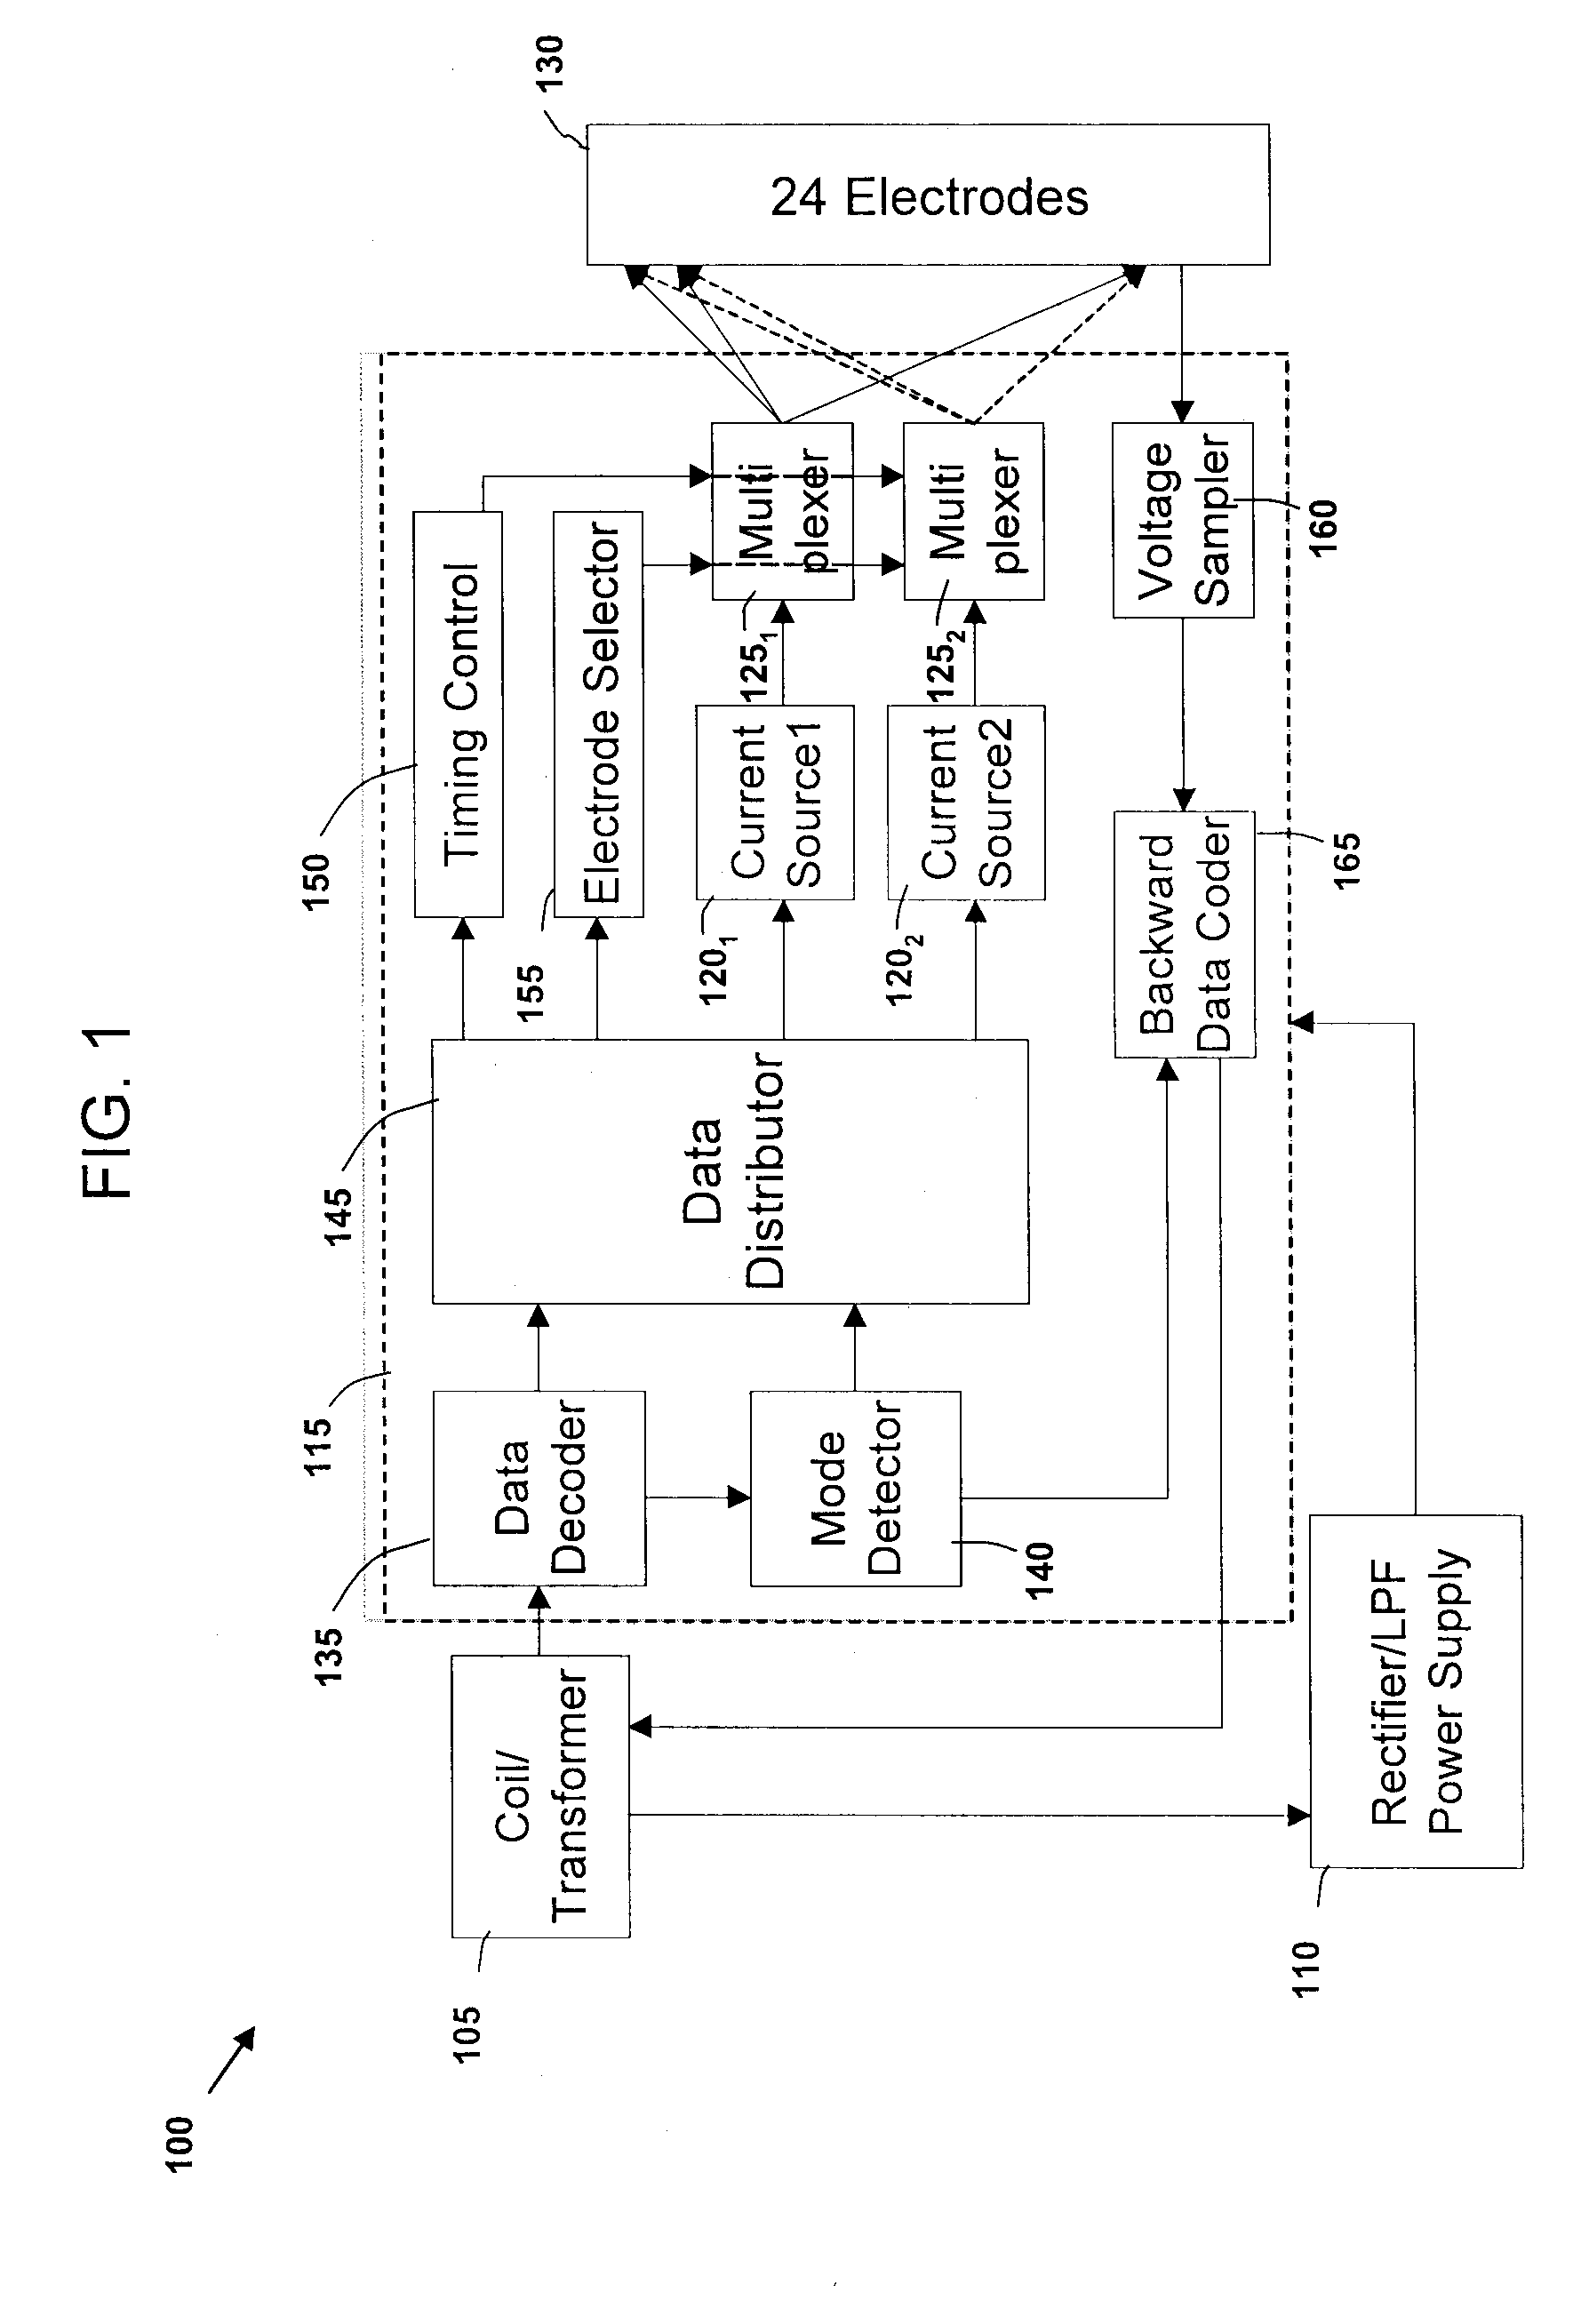 Cochlear Implant Utilizing Mutliple-Resolution Current Sources and Flexible Data Encoding